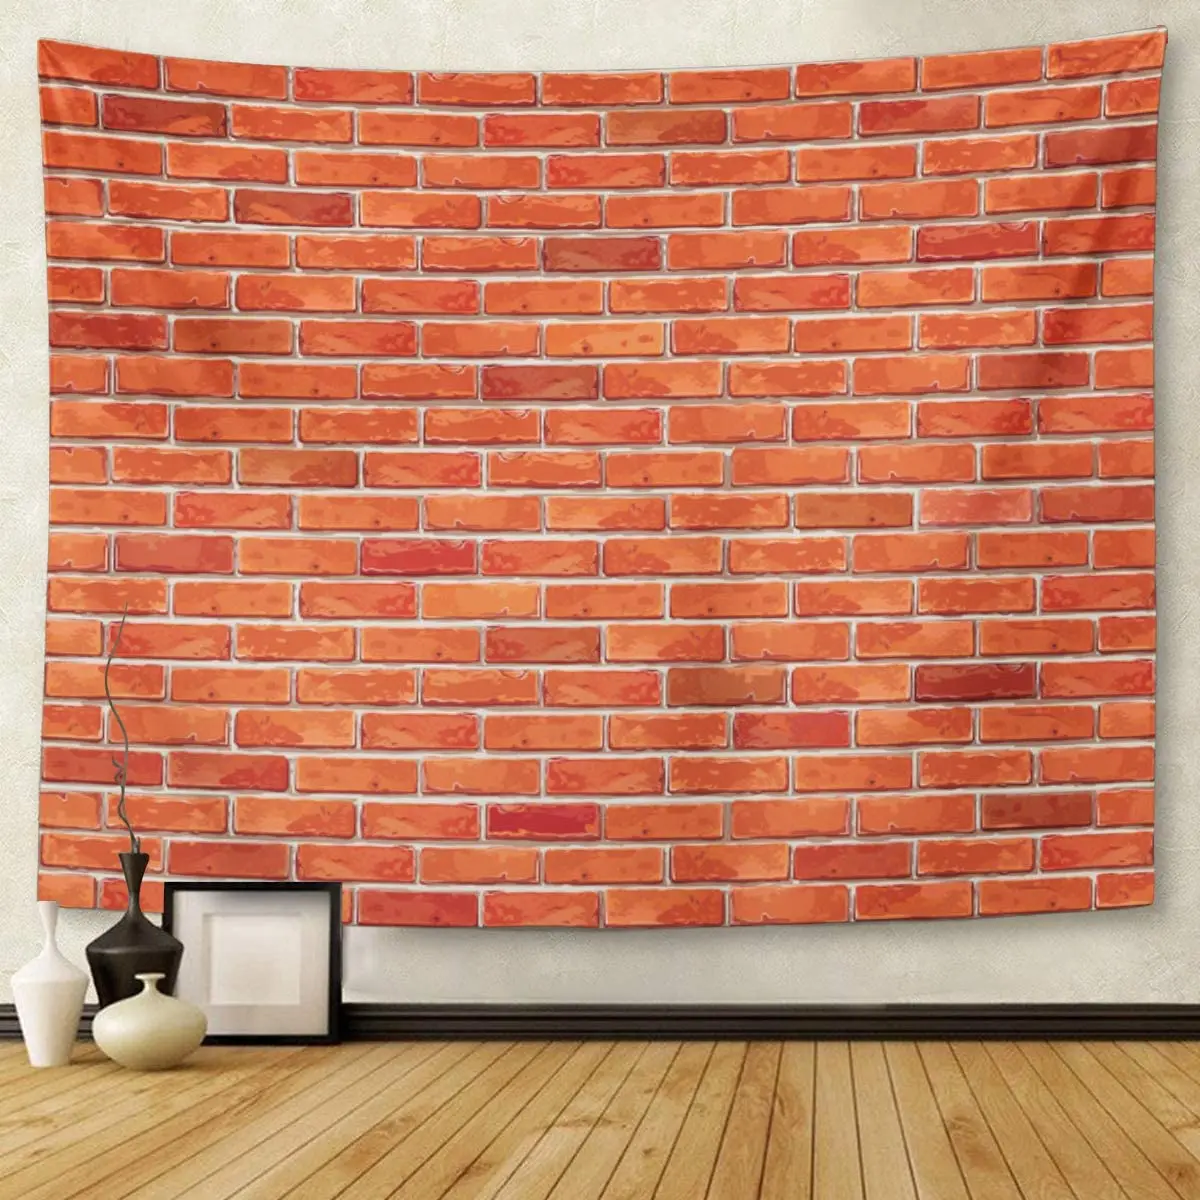 

Brown Brickwall Red Brick Wall Pattern for Continuous Replicate Stone Block Tapestry Wall Hanging for Living Room Bedroom Dorm